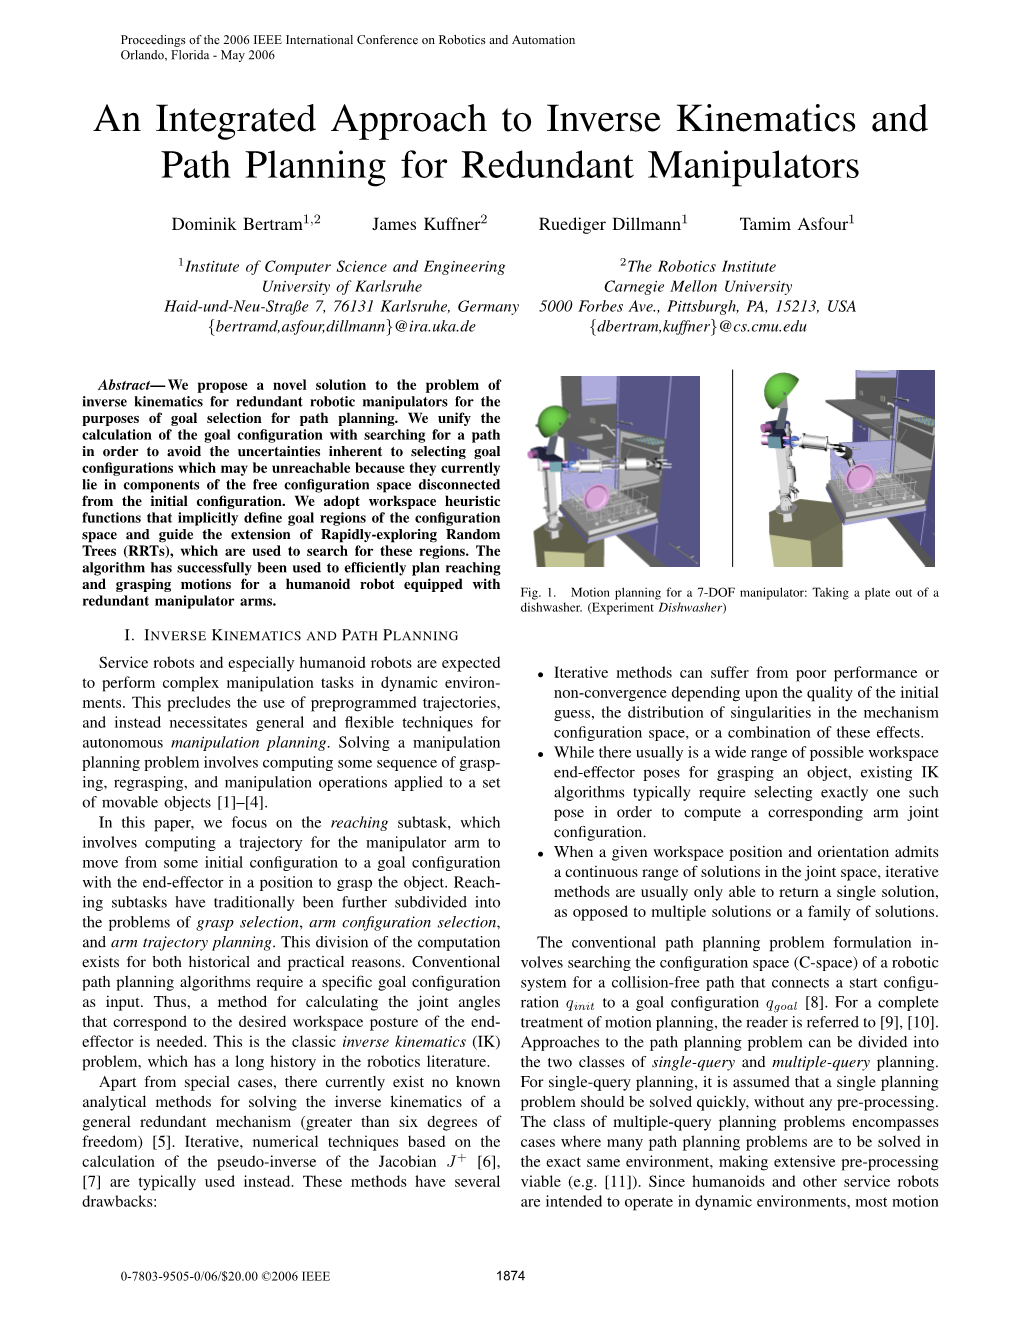 An Integrated Approach to Inverse Kinematics and Path Planning for Redundant Manipulators